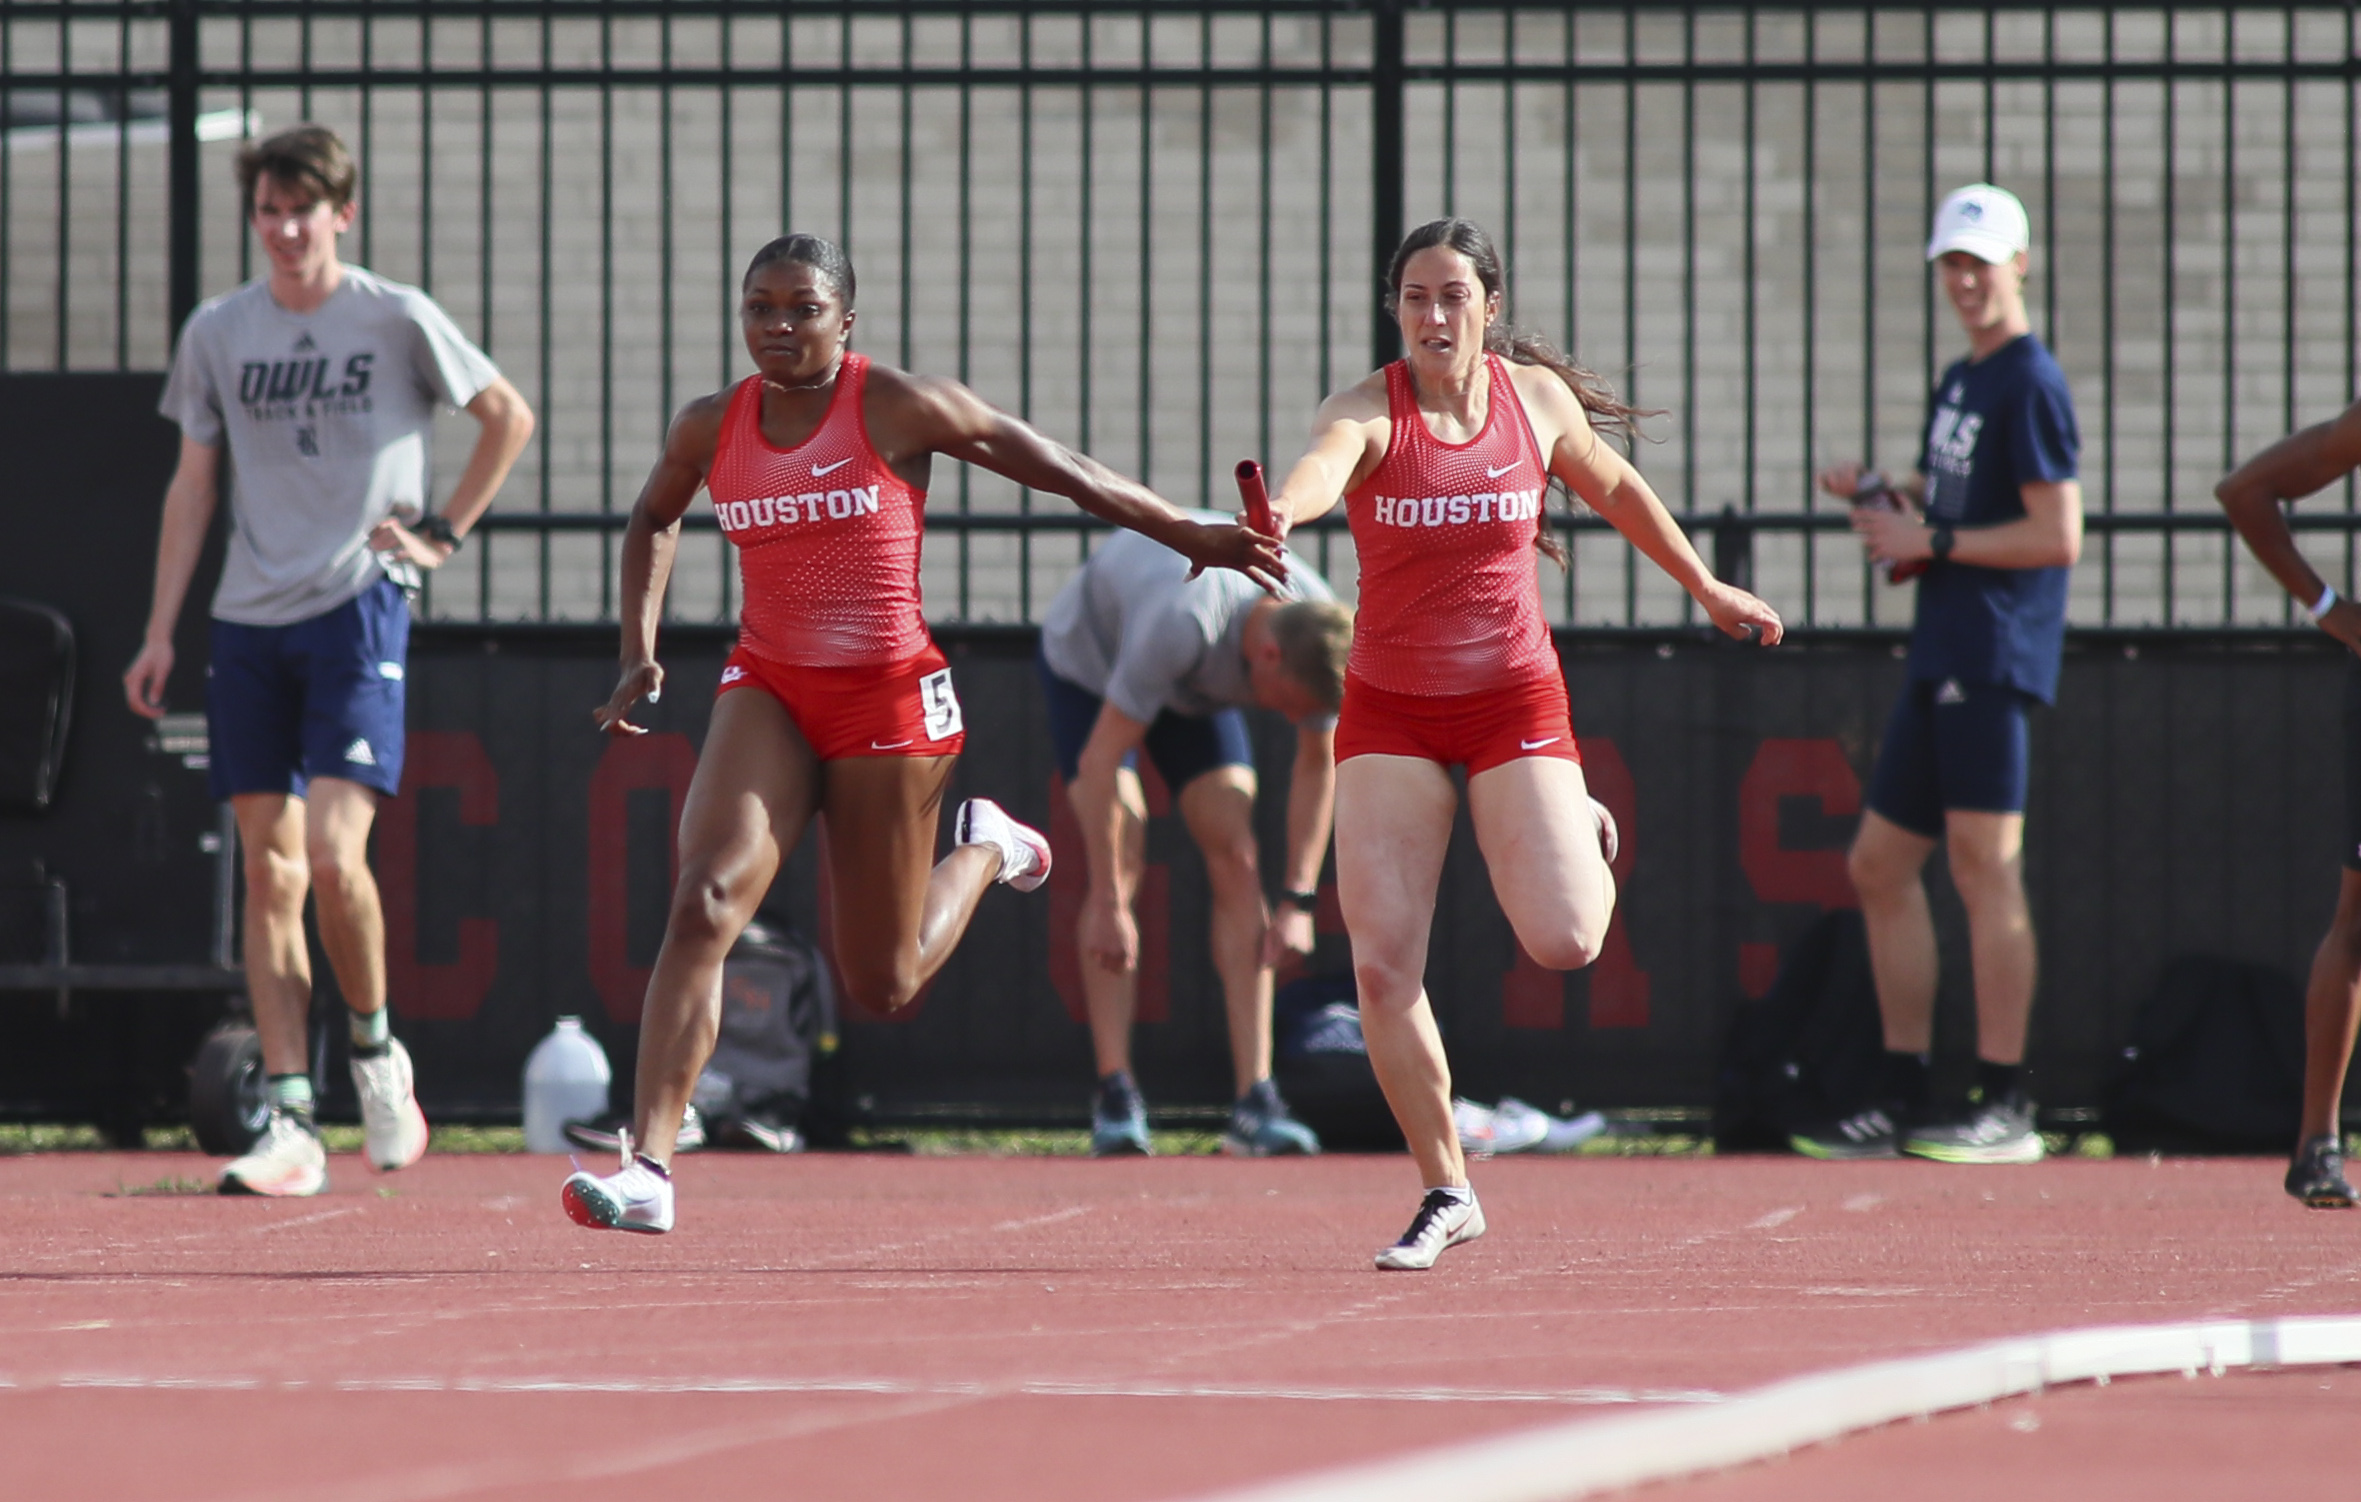 UH track and field's women's 4x100-meter relay team exchanges the baton on its way to victory in the event at the Tom Tellez Invitational. | Courtesy of UH athletics